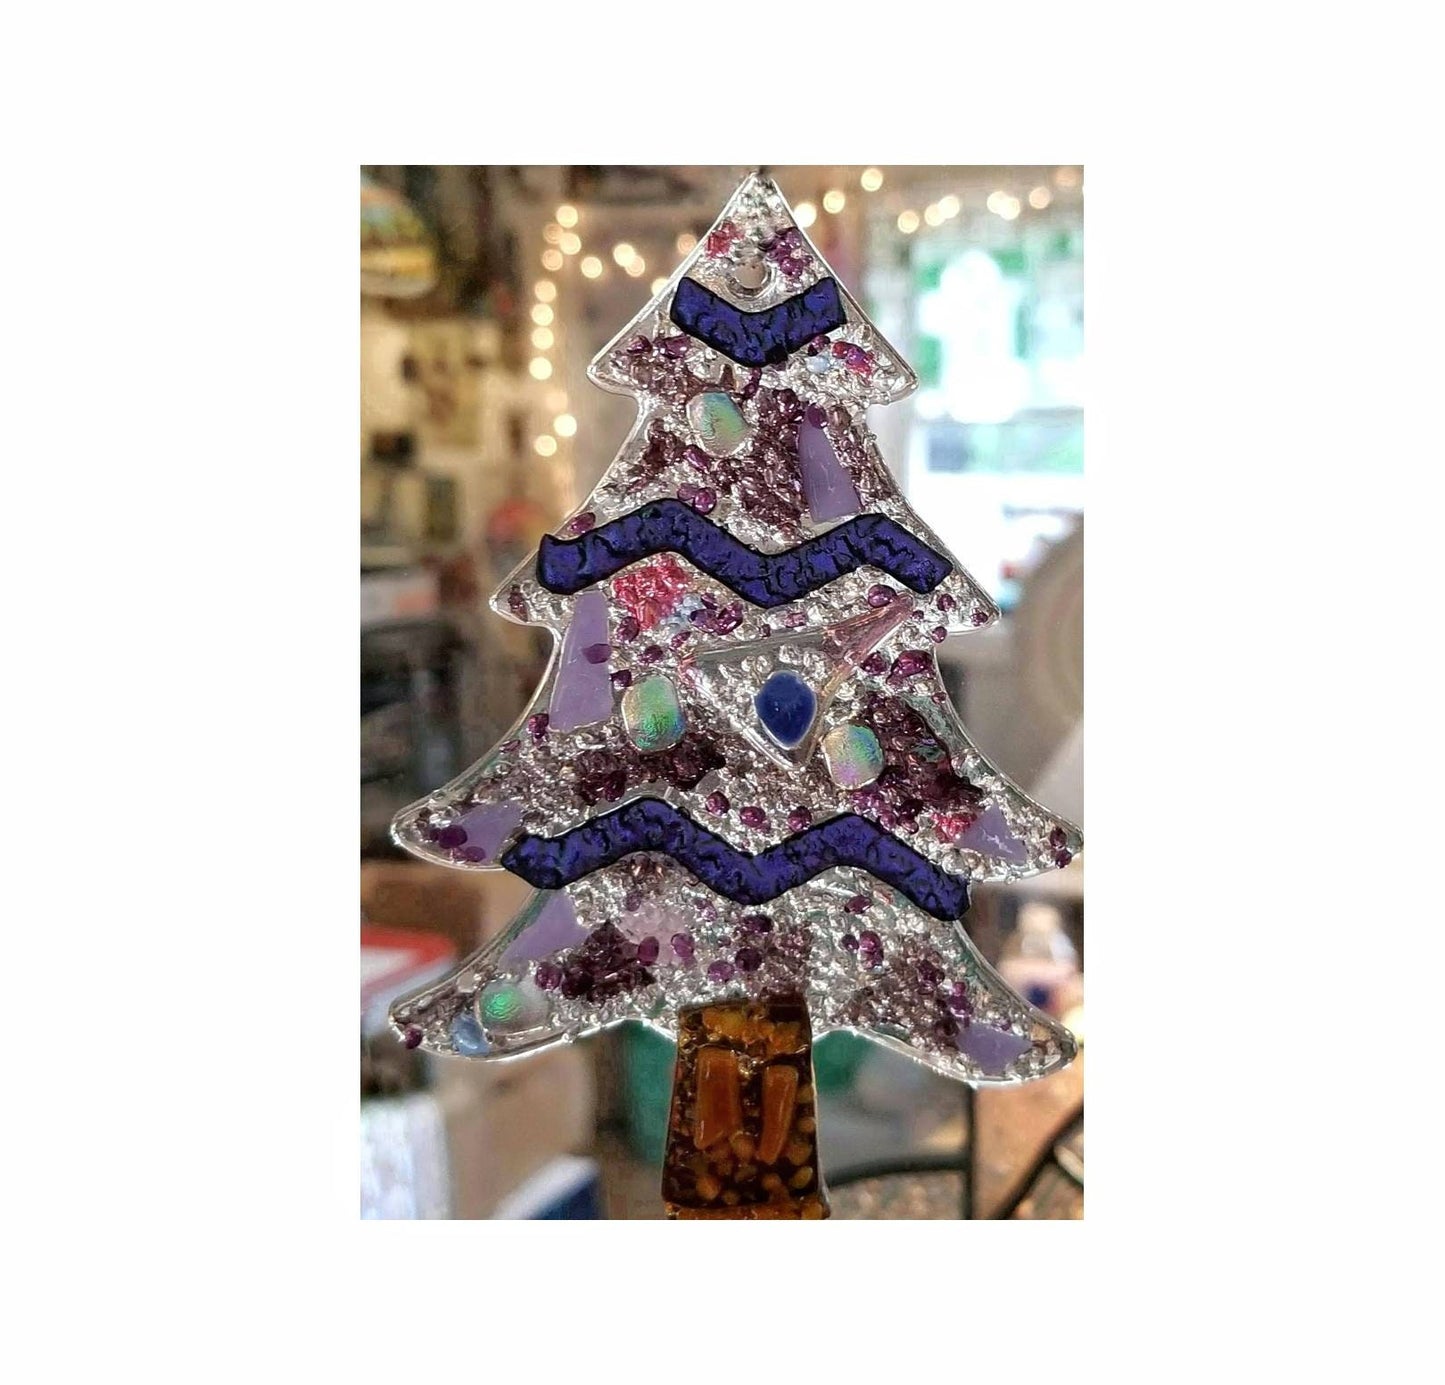 Purple Glass Tree Suncatcher. Dichroic shapes & crushed glass are kiln fired to create this hanging ornament. Gift boxed, shipping included.